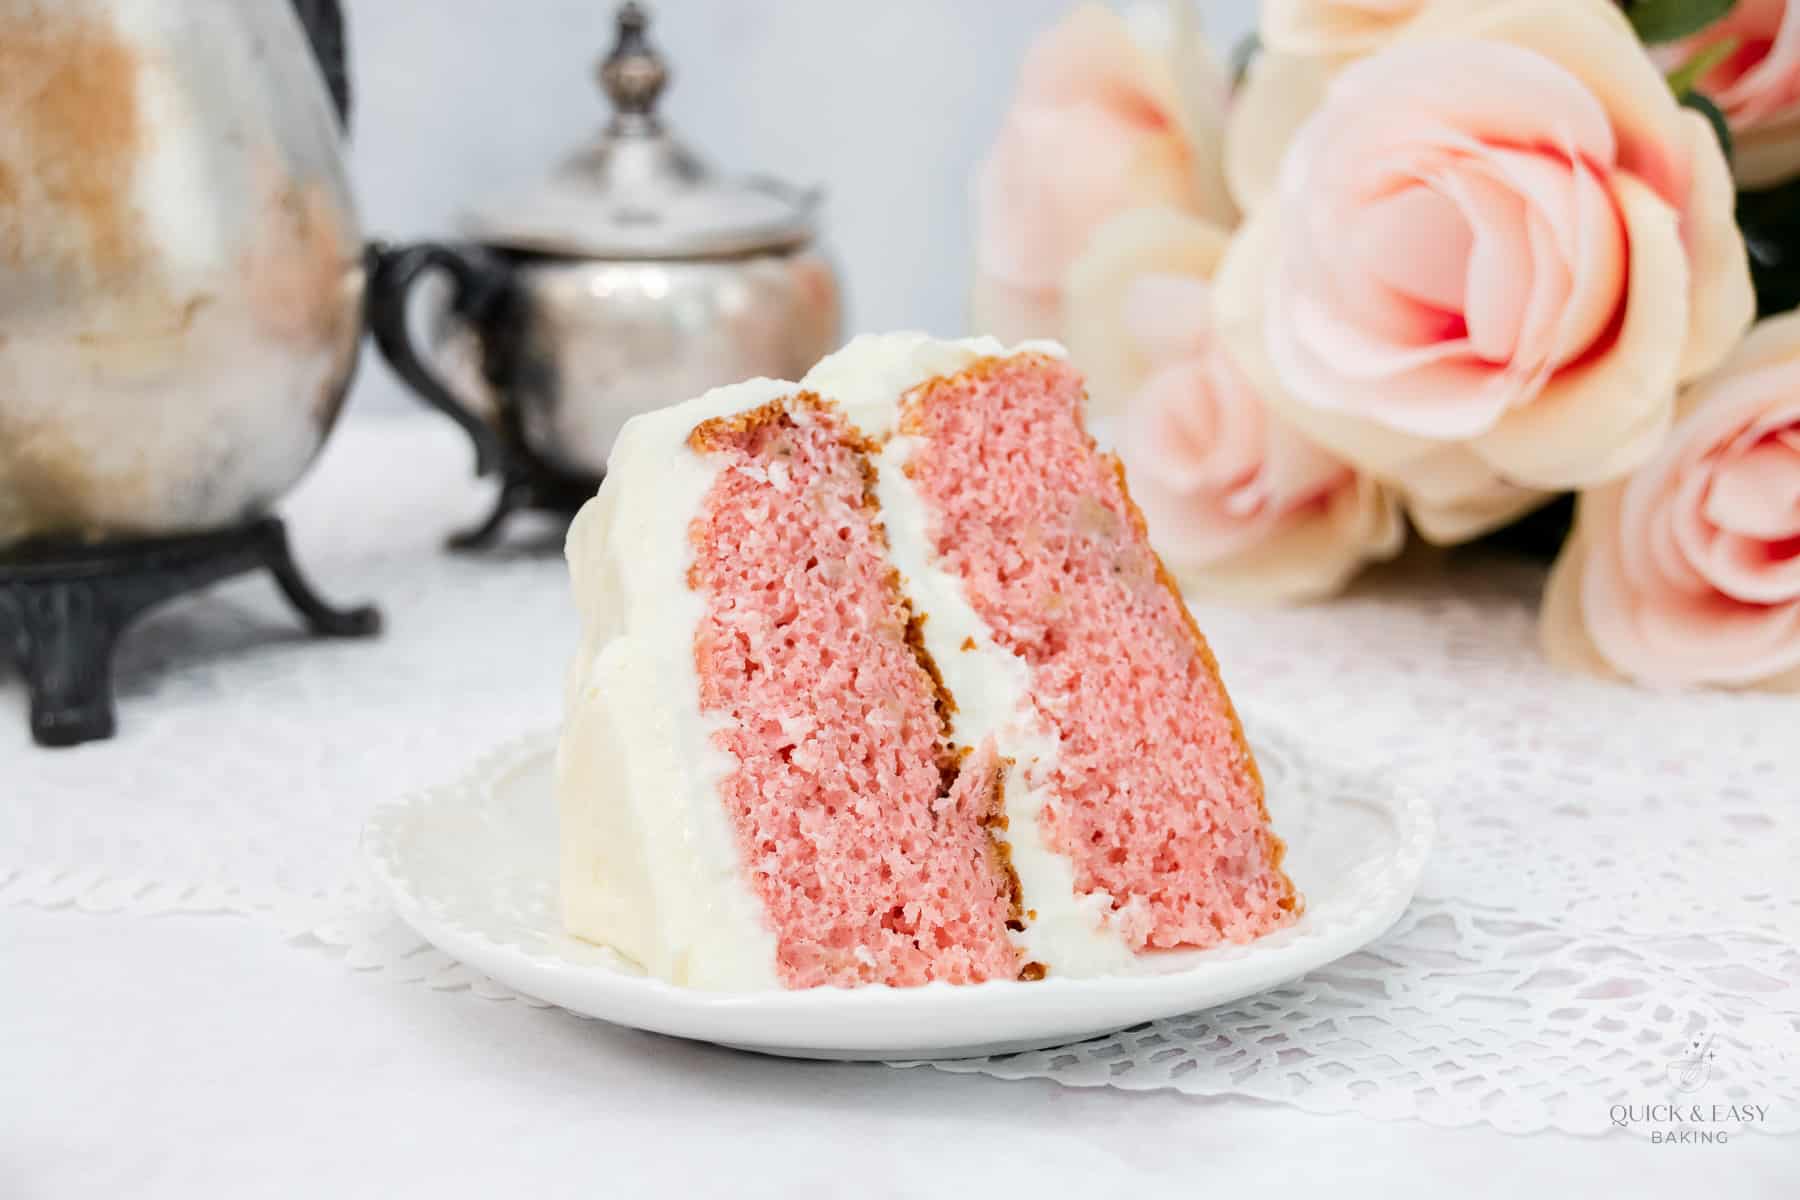 Large slice of banana cake with strawberry on a white plate.